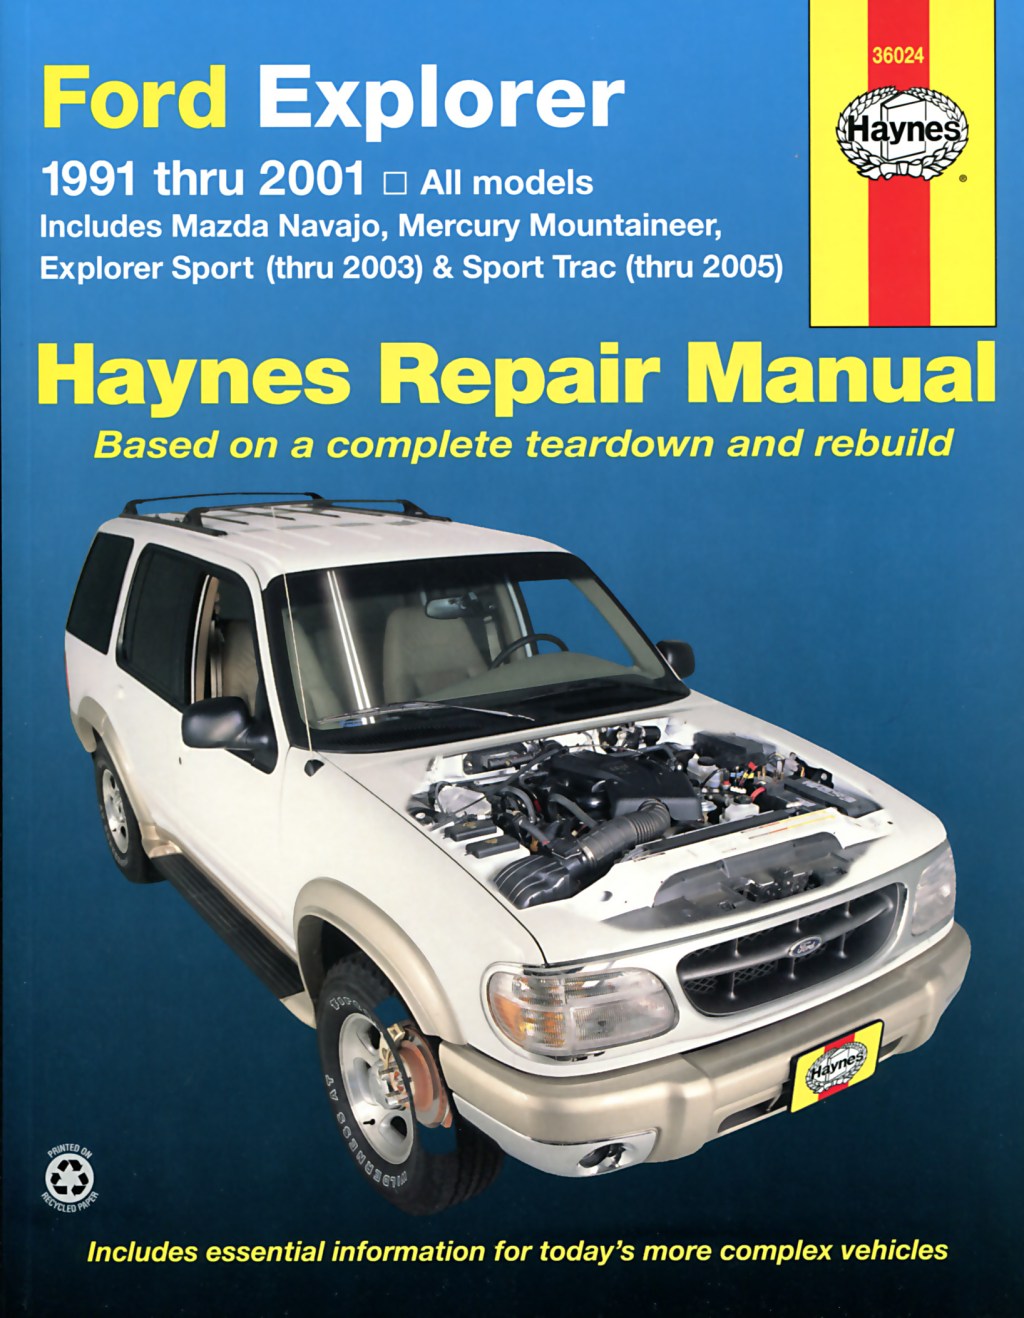 Picture of: Ford Explorer common problems (-)  Haynes Manuals